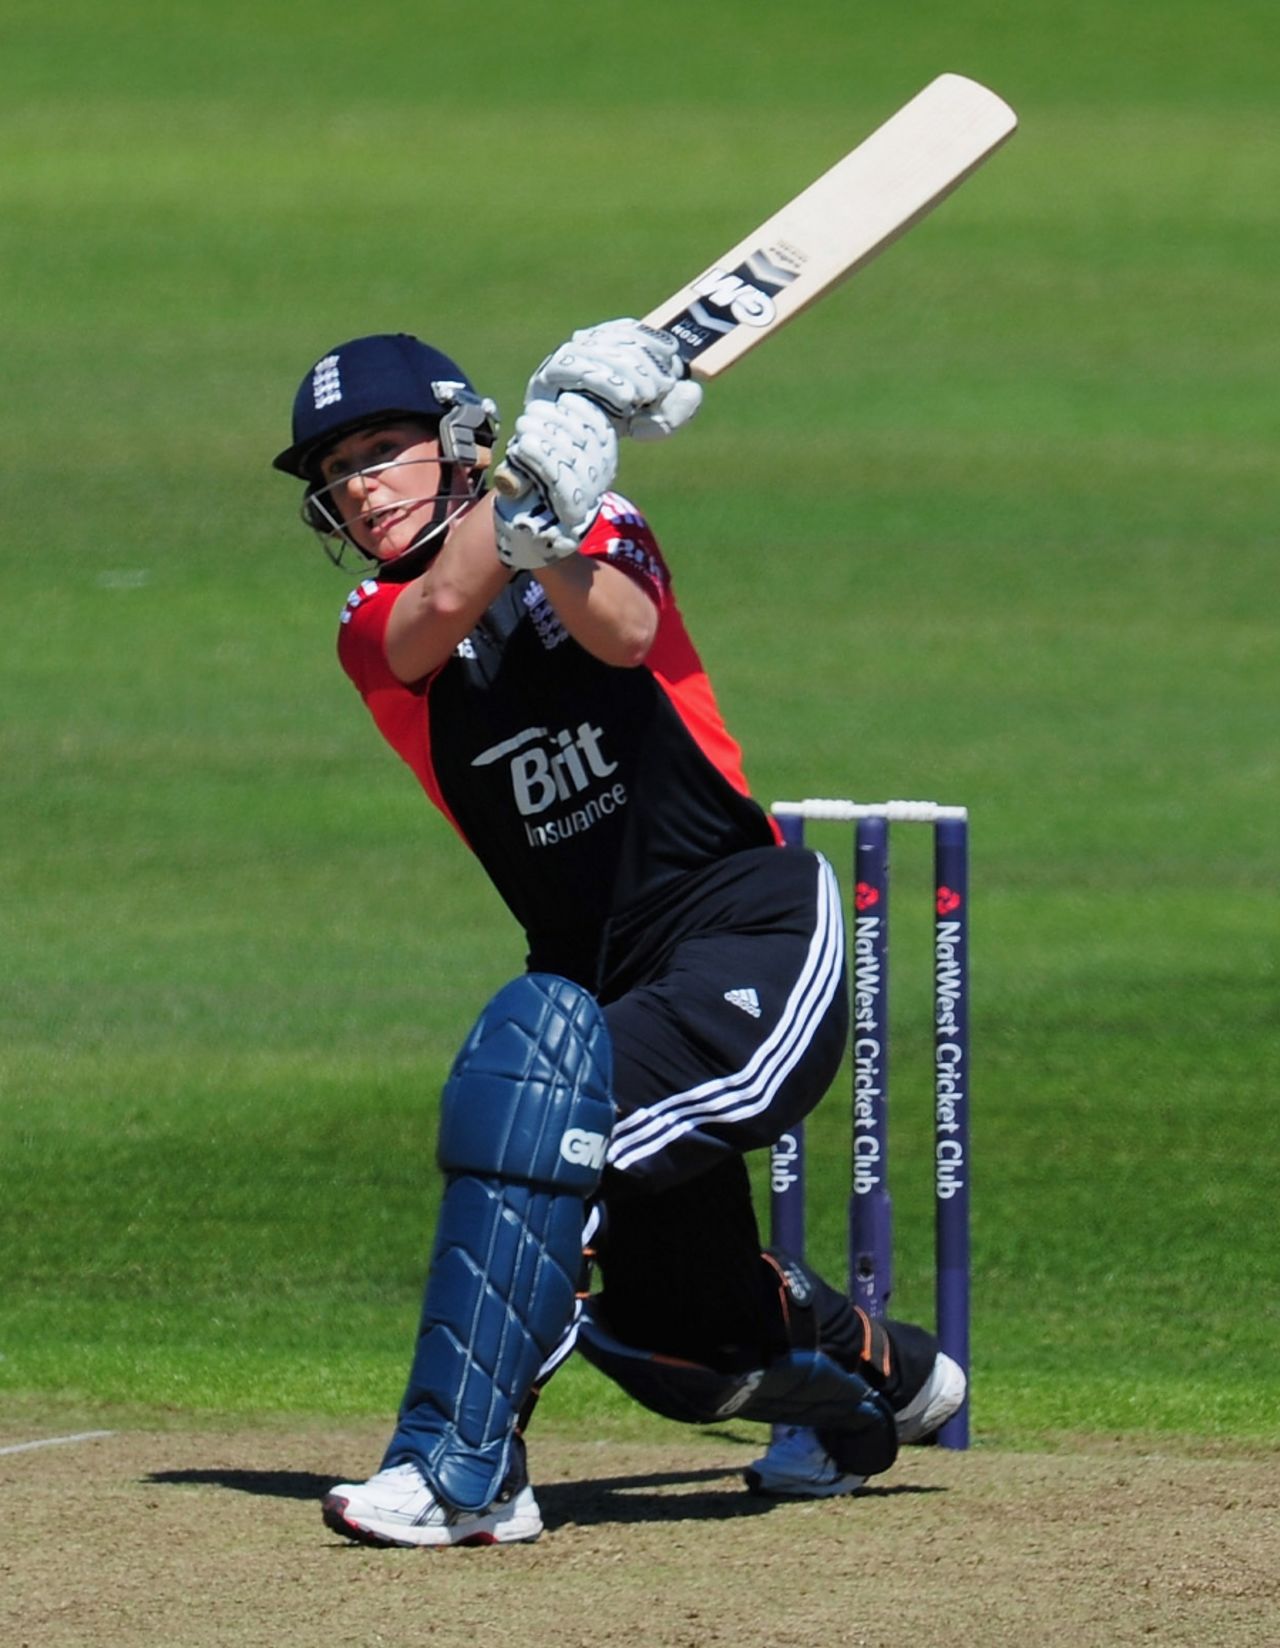 Claire Taylor cracks a boundary during her fifty, England v India, NatWest Women's T20 Quadrangular Series, Taunton, June 26 2011